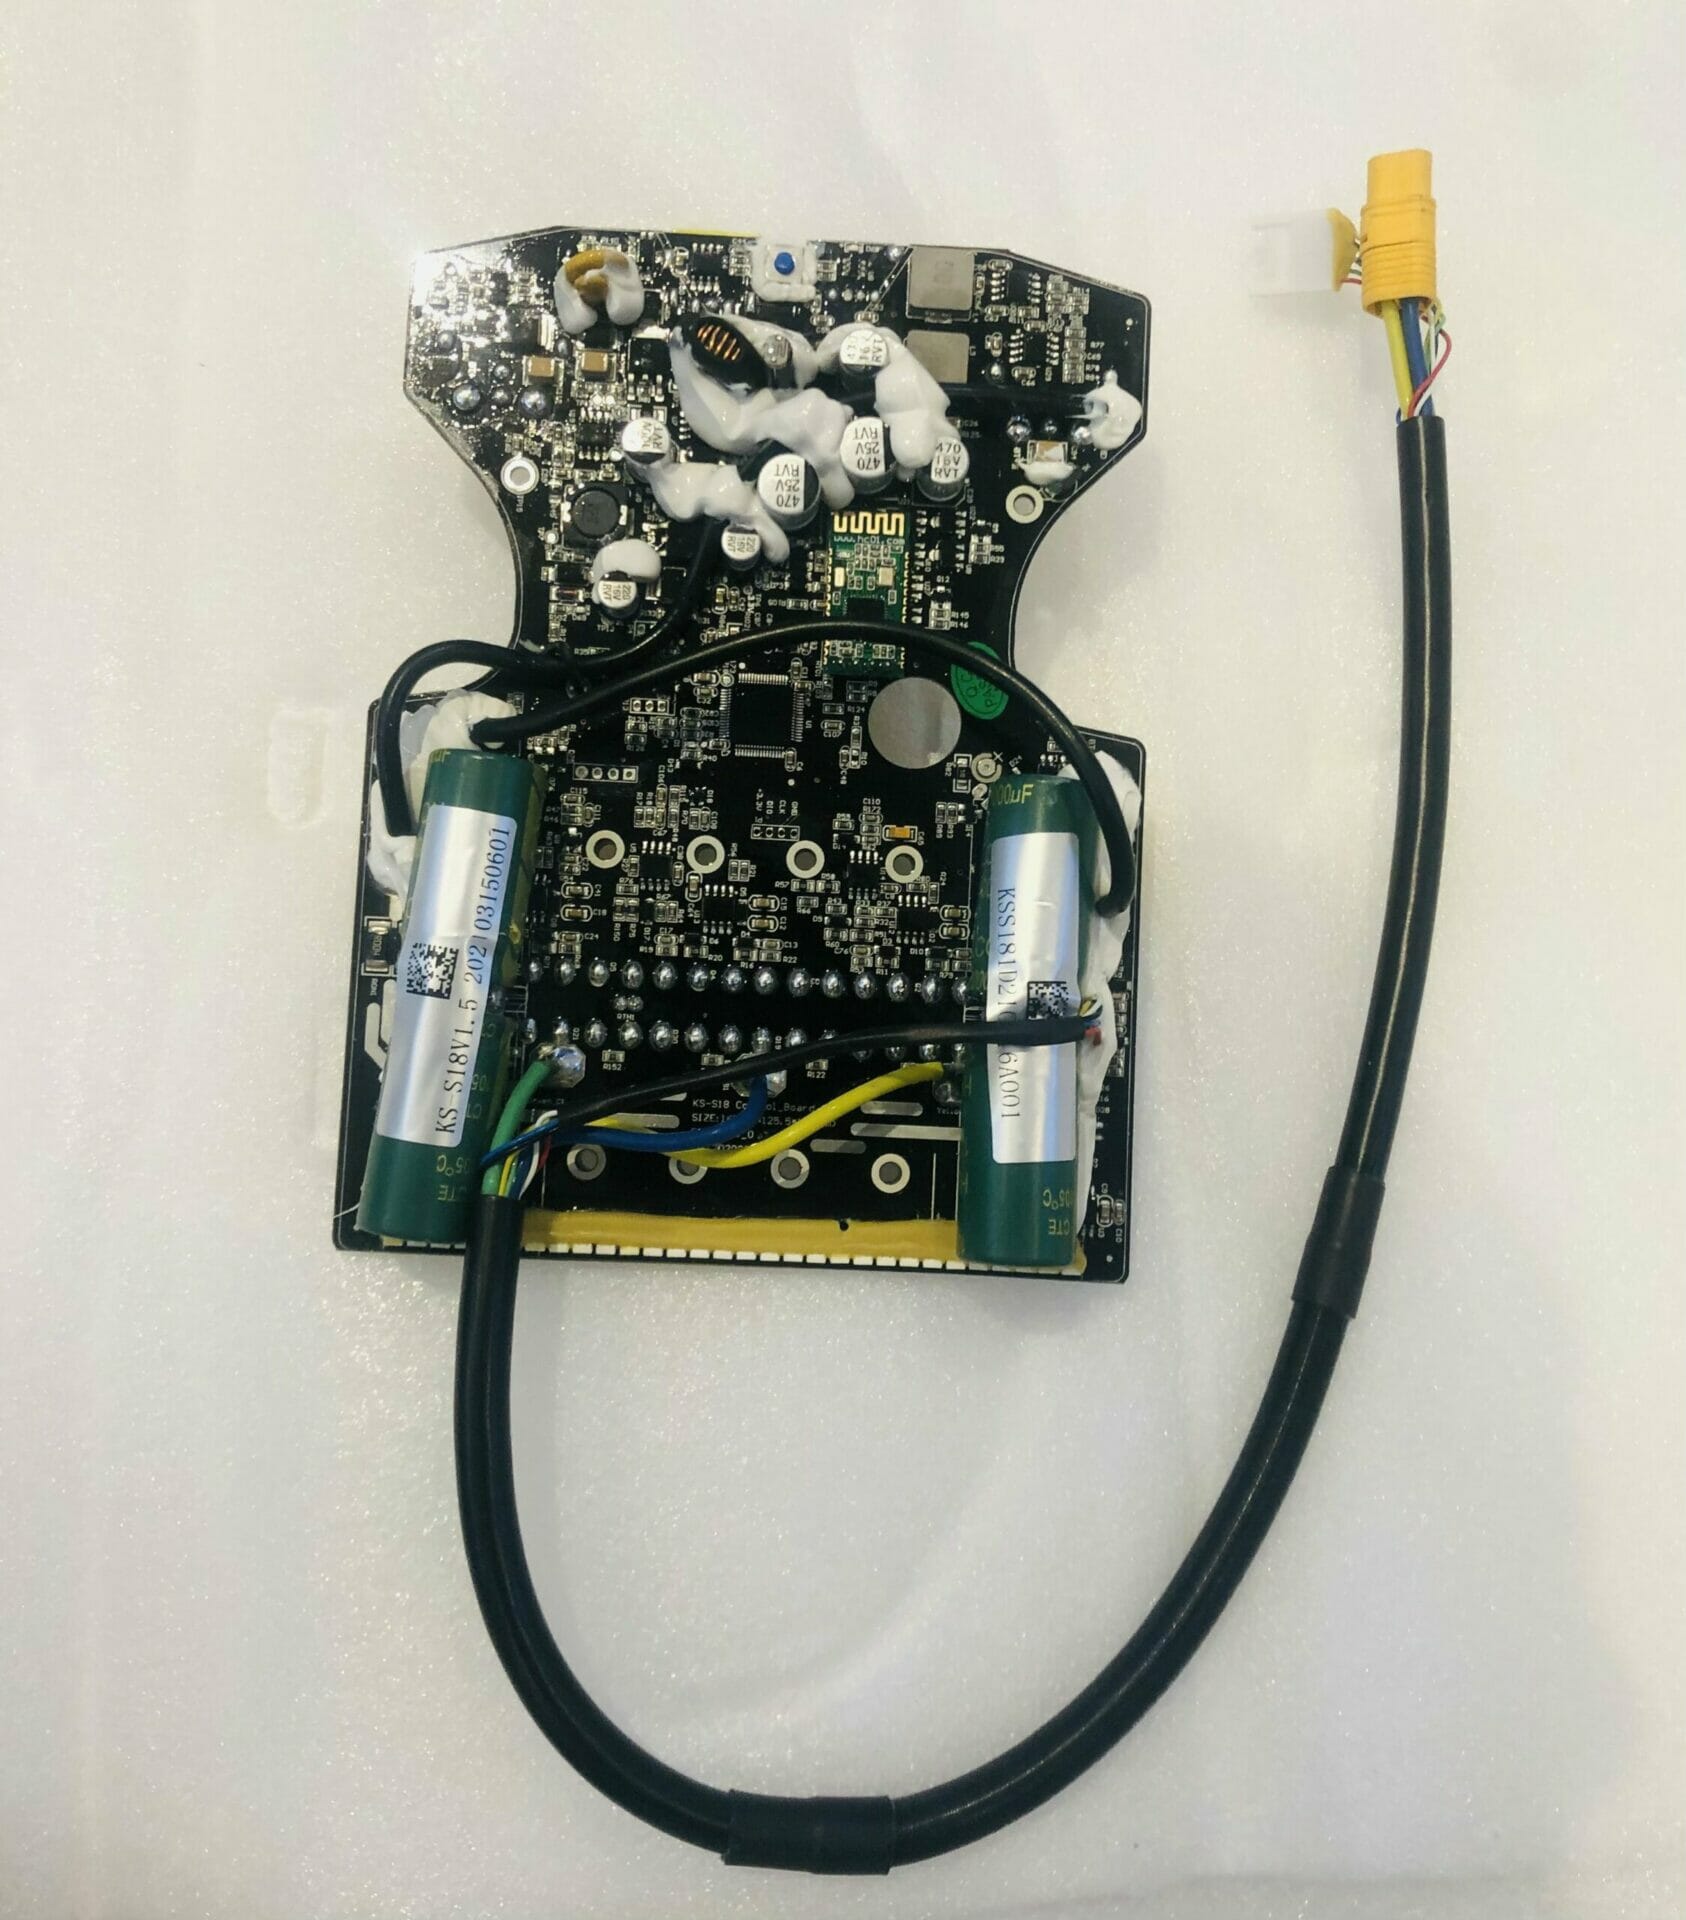 Kingsong S18 Electric Unicycle Control board/mainboard